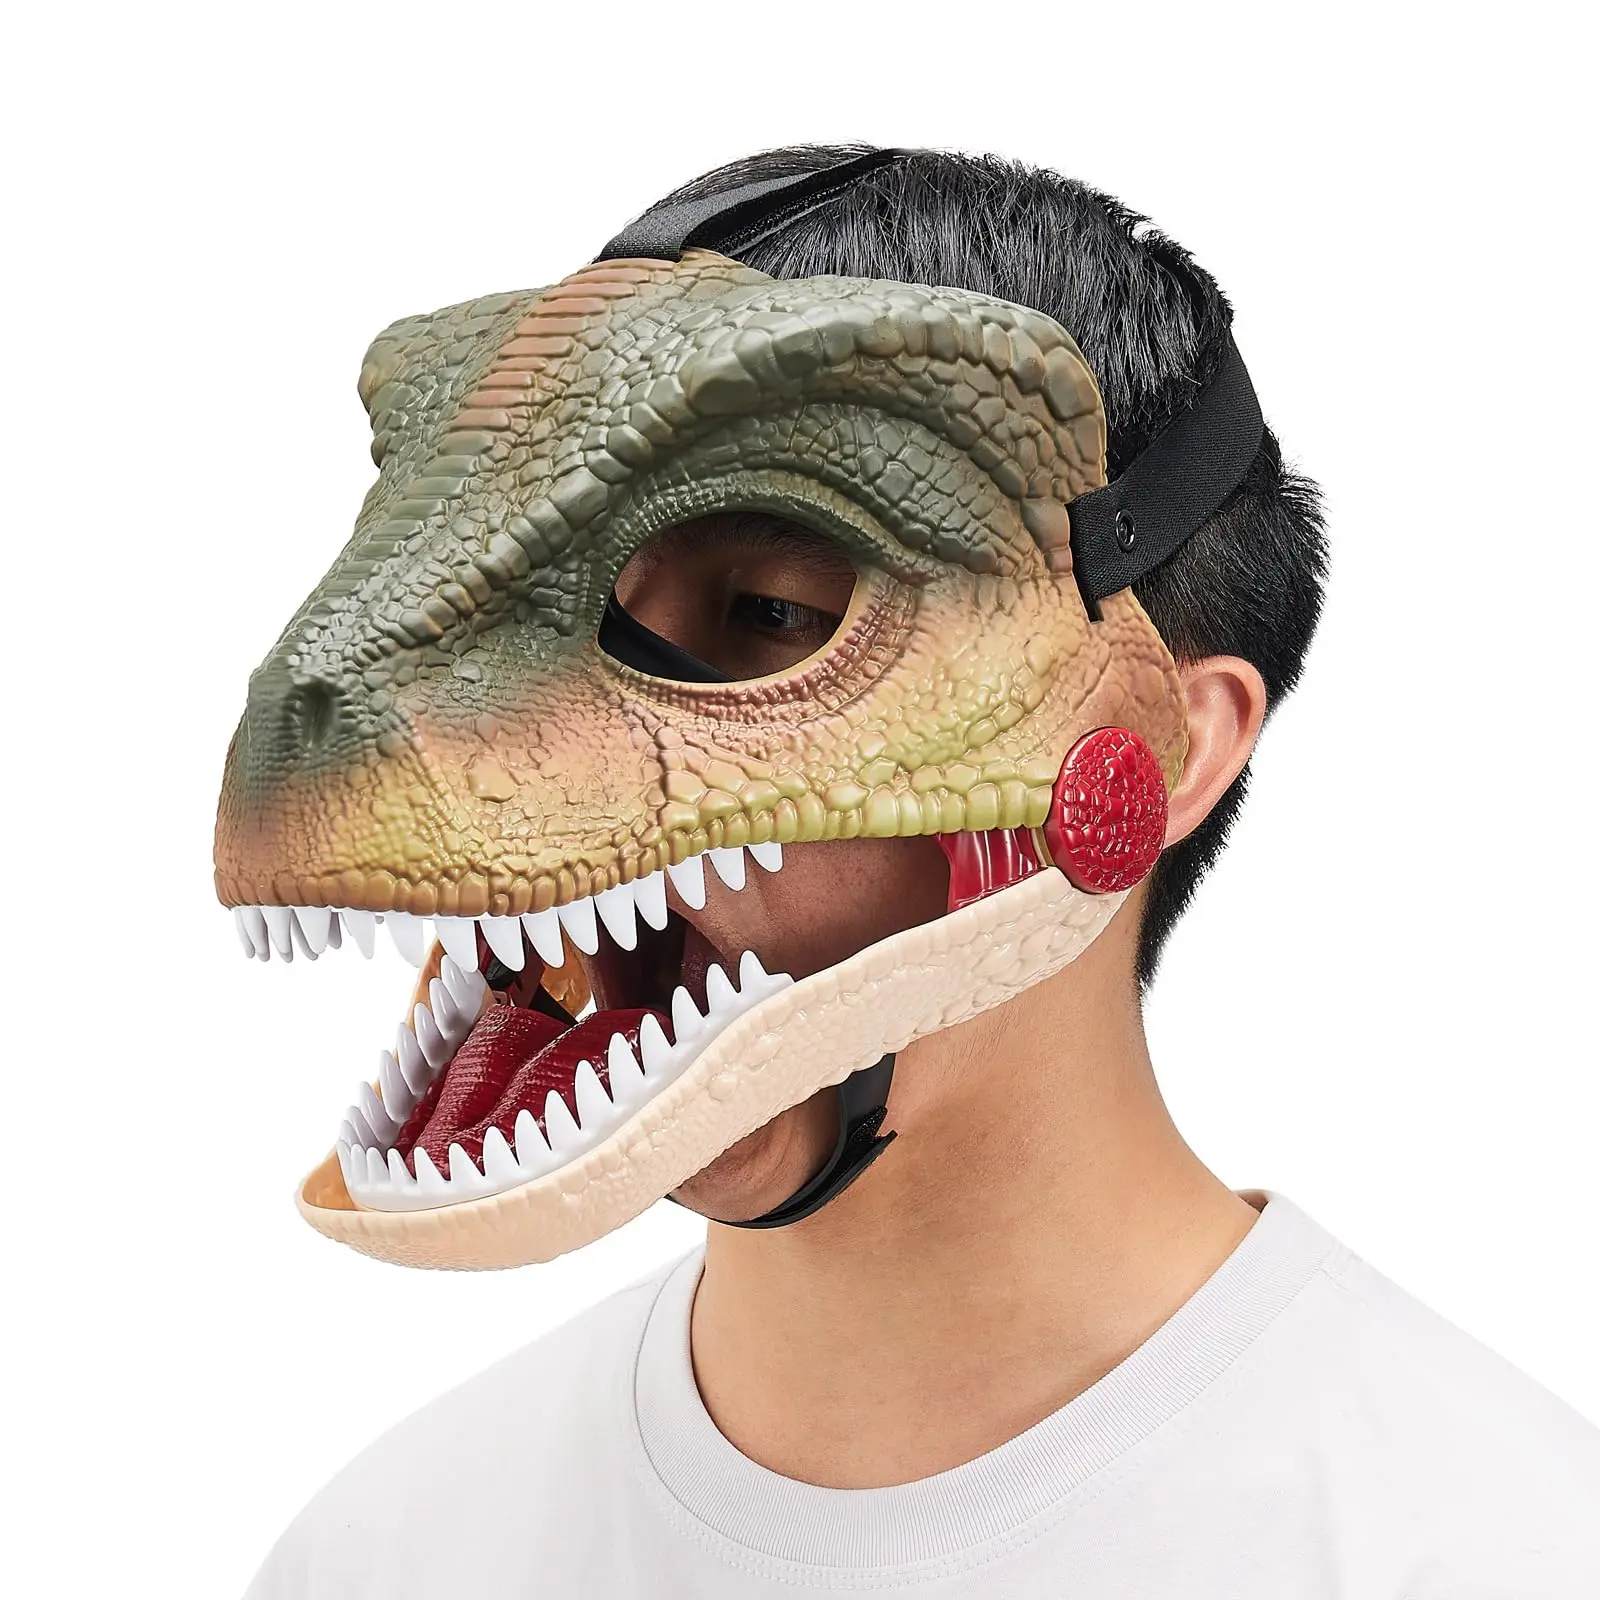 

Funny Dinosaur Mask Dino Mask Moving Jaw Halloween Mask Dinosaur Head Face Mask Movable Mouth Party Cosplay Props